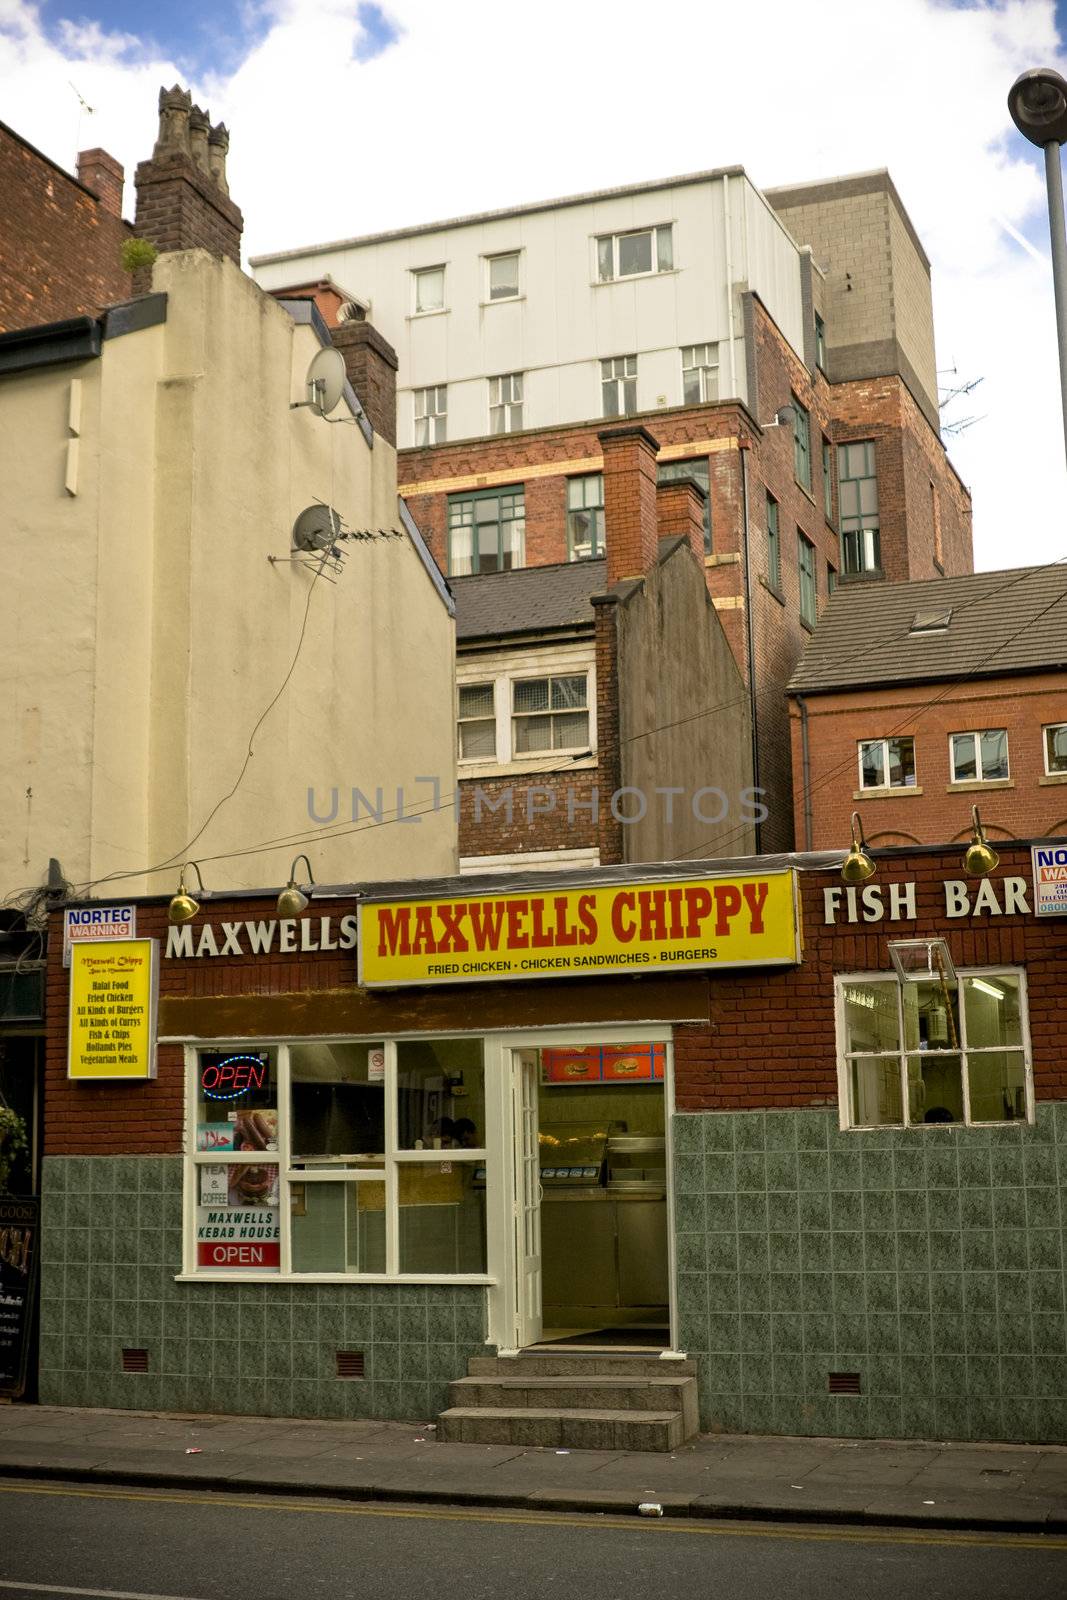 Maxwells Chippy by cvail73